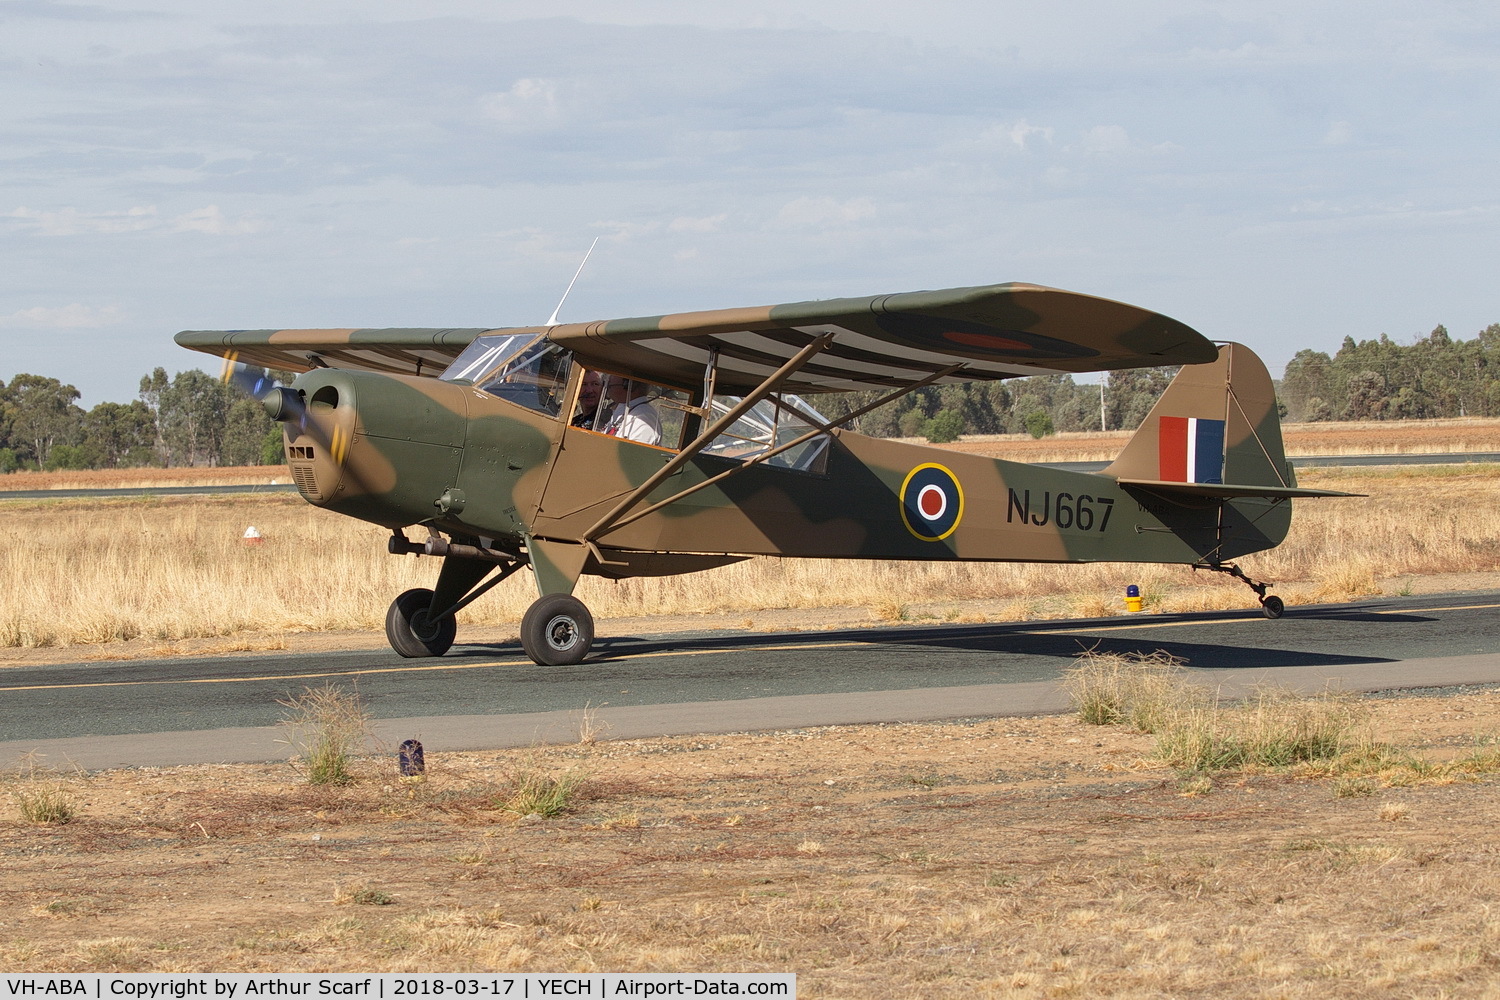 VH-ABA, 1945 Taylorcraft J Auster 5 C/N 1050, VH-ABA with a new paint job AAAA Fly in Echuca 2018